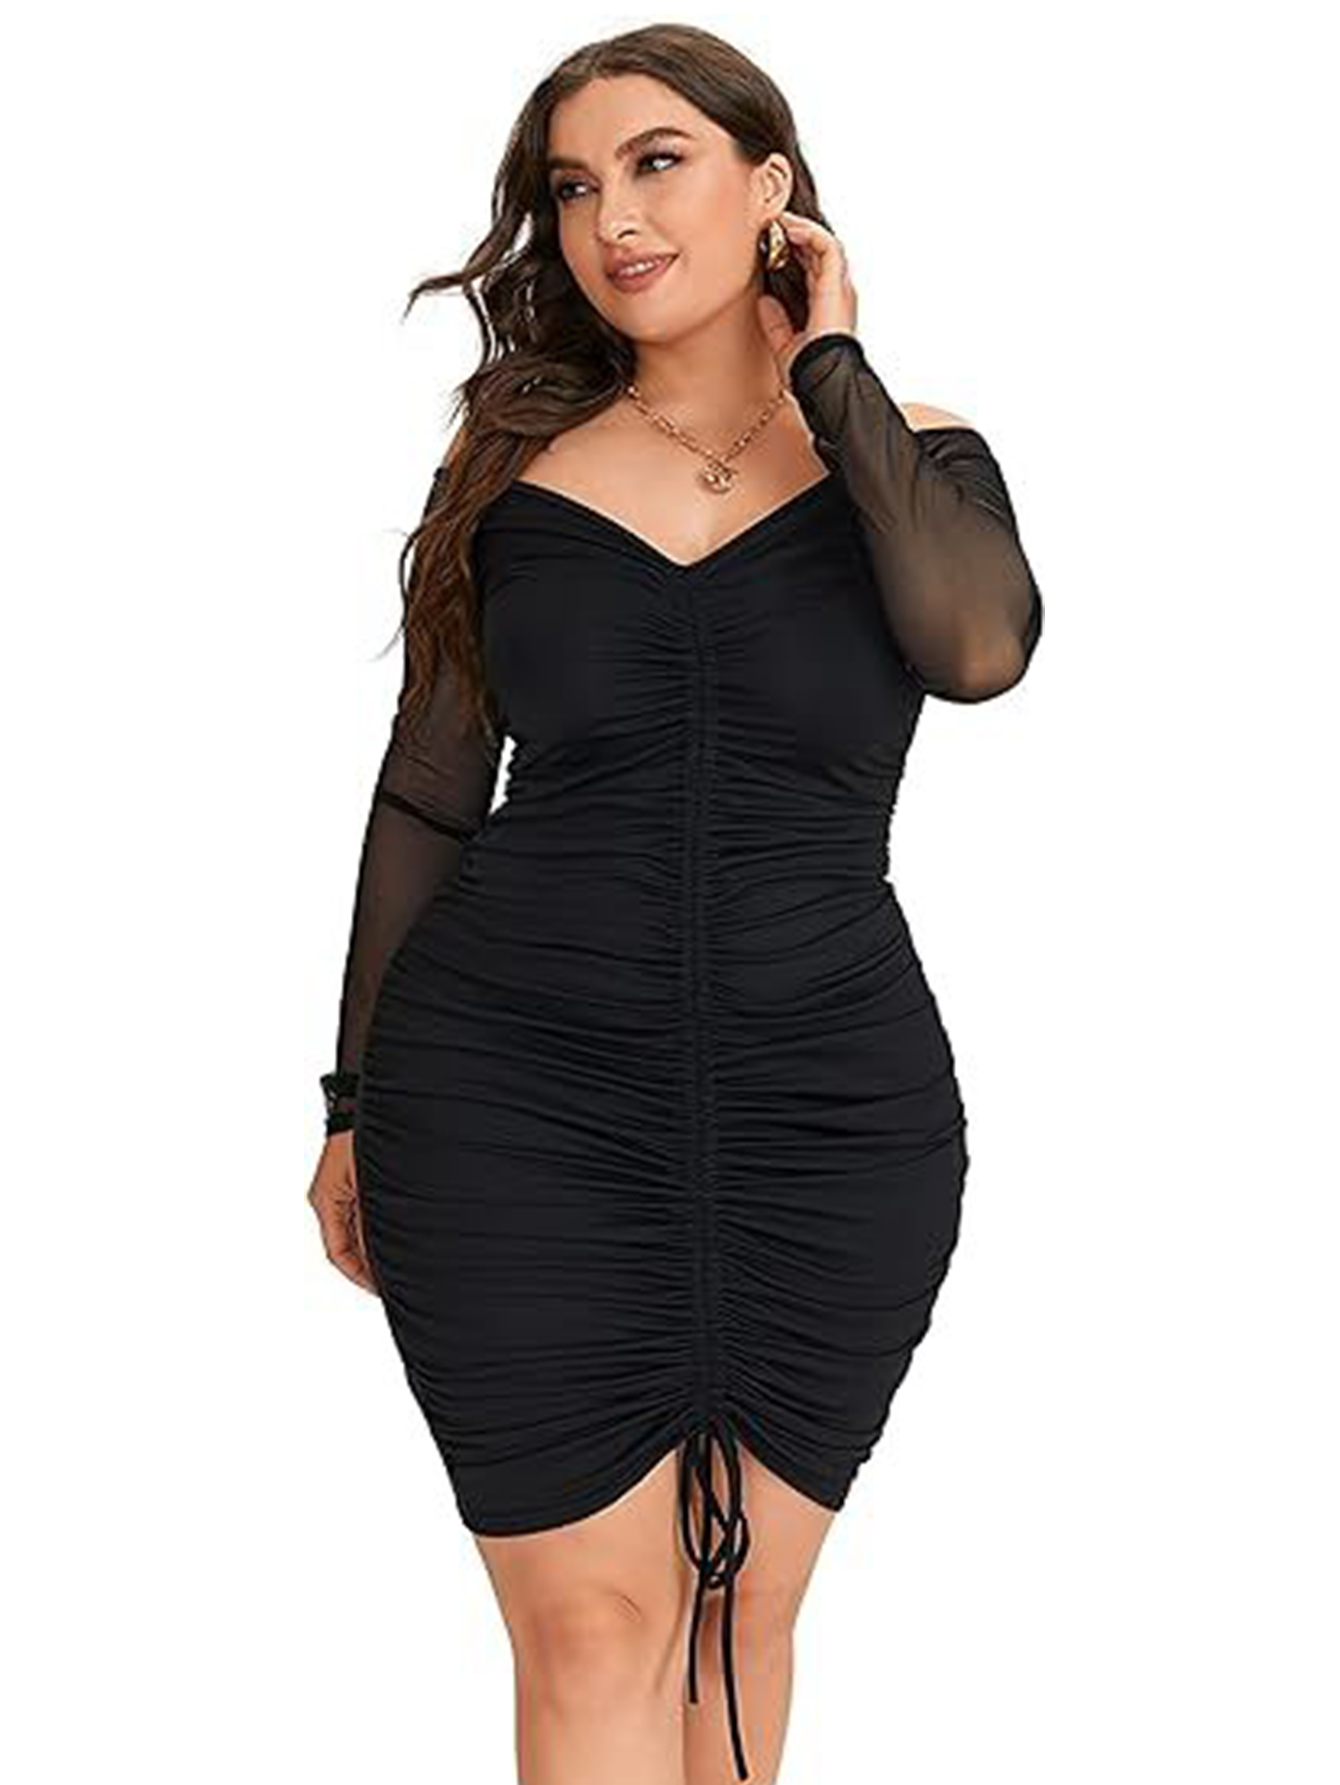 Women's Plus Size Sexy Dress, Off Shoulder Ruched Bodycon Mesh Long Sleeve Party Cocktail Dresses